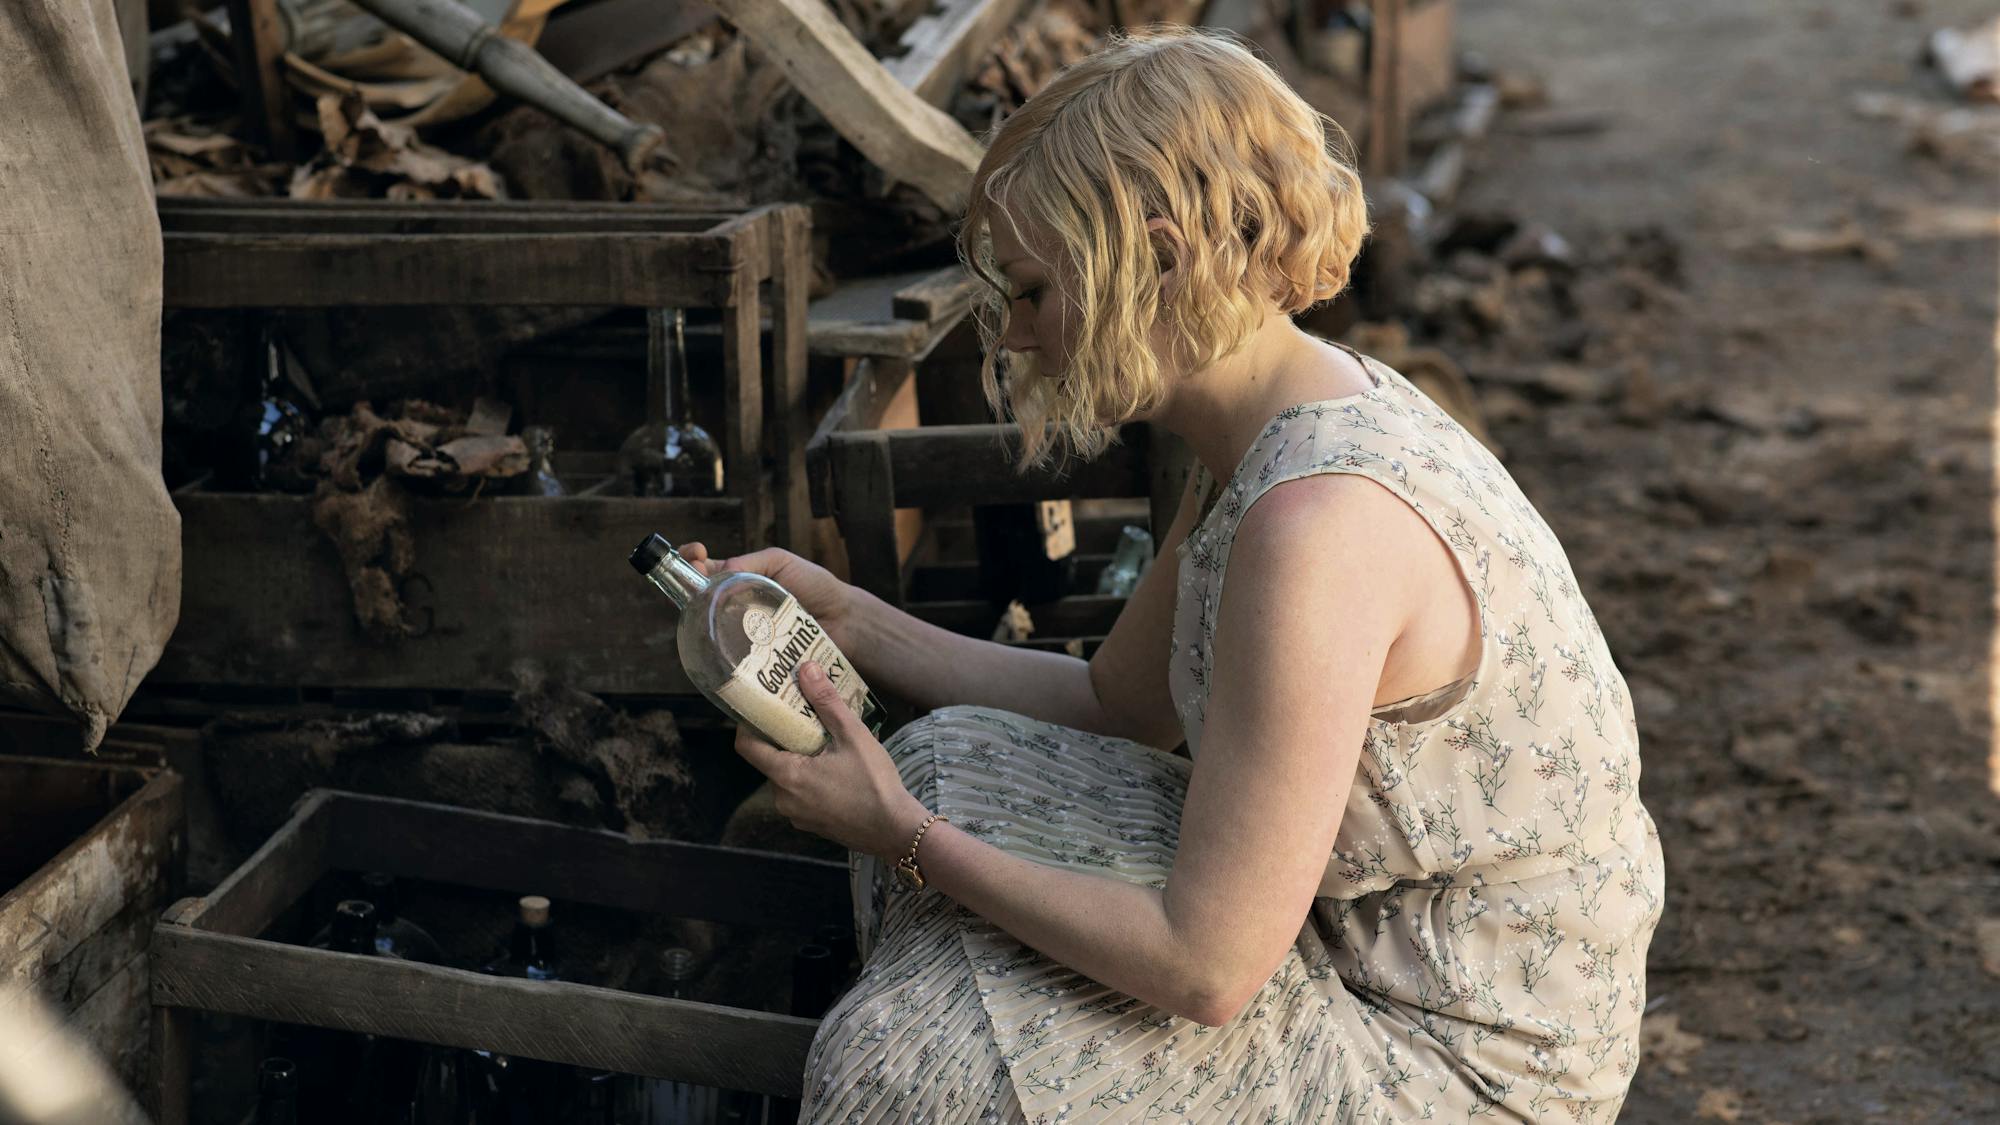 Kirsten Dunst wears a white sleeveless dress and examines a bottle of whiskey from a crate. The ground is muddy.